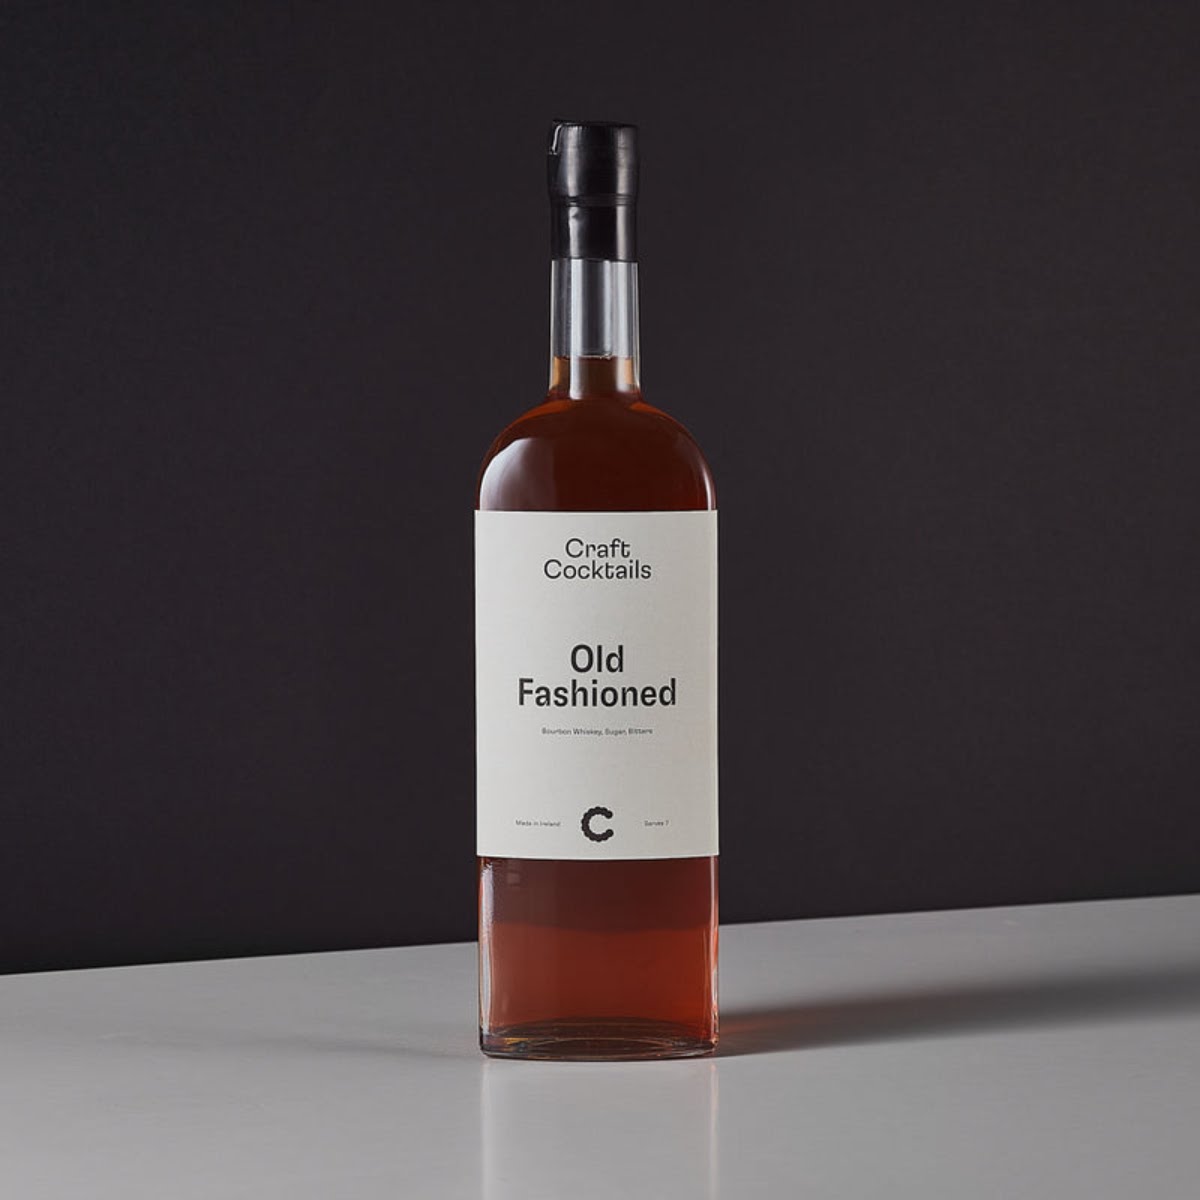 Craft Cocktails Old Fashioned, 700ml, €35